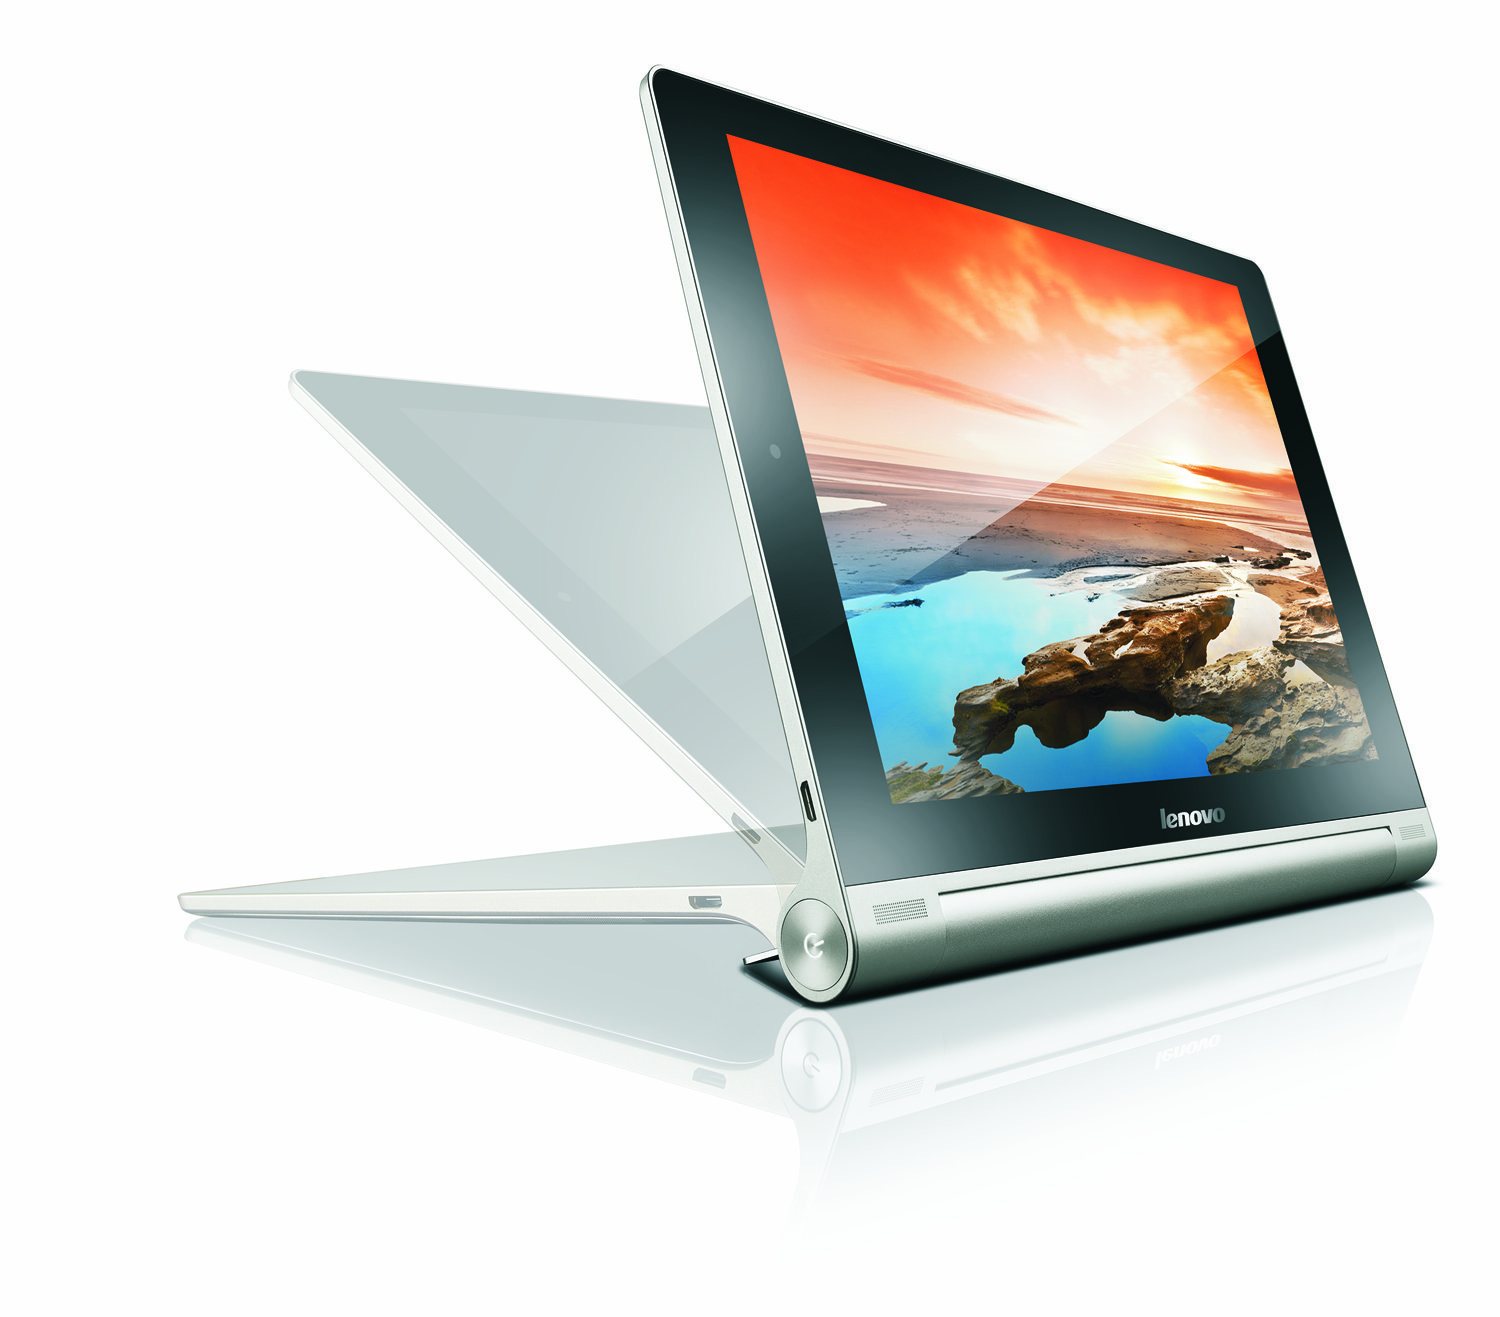 Lenovo Unveils New Yoga Tablet 10 HD+ Android Tablet